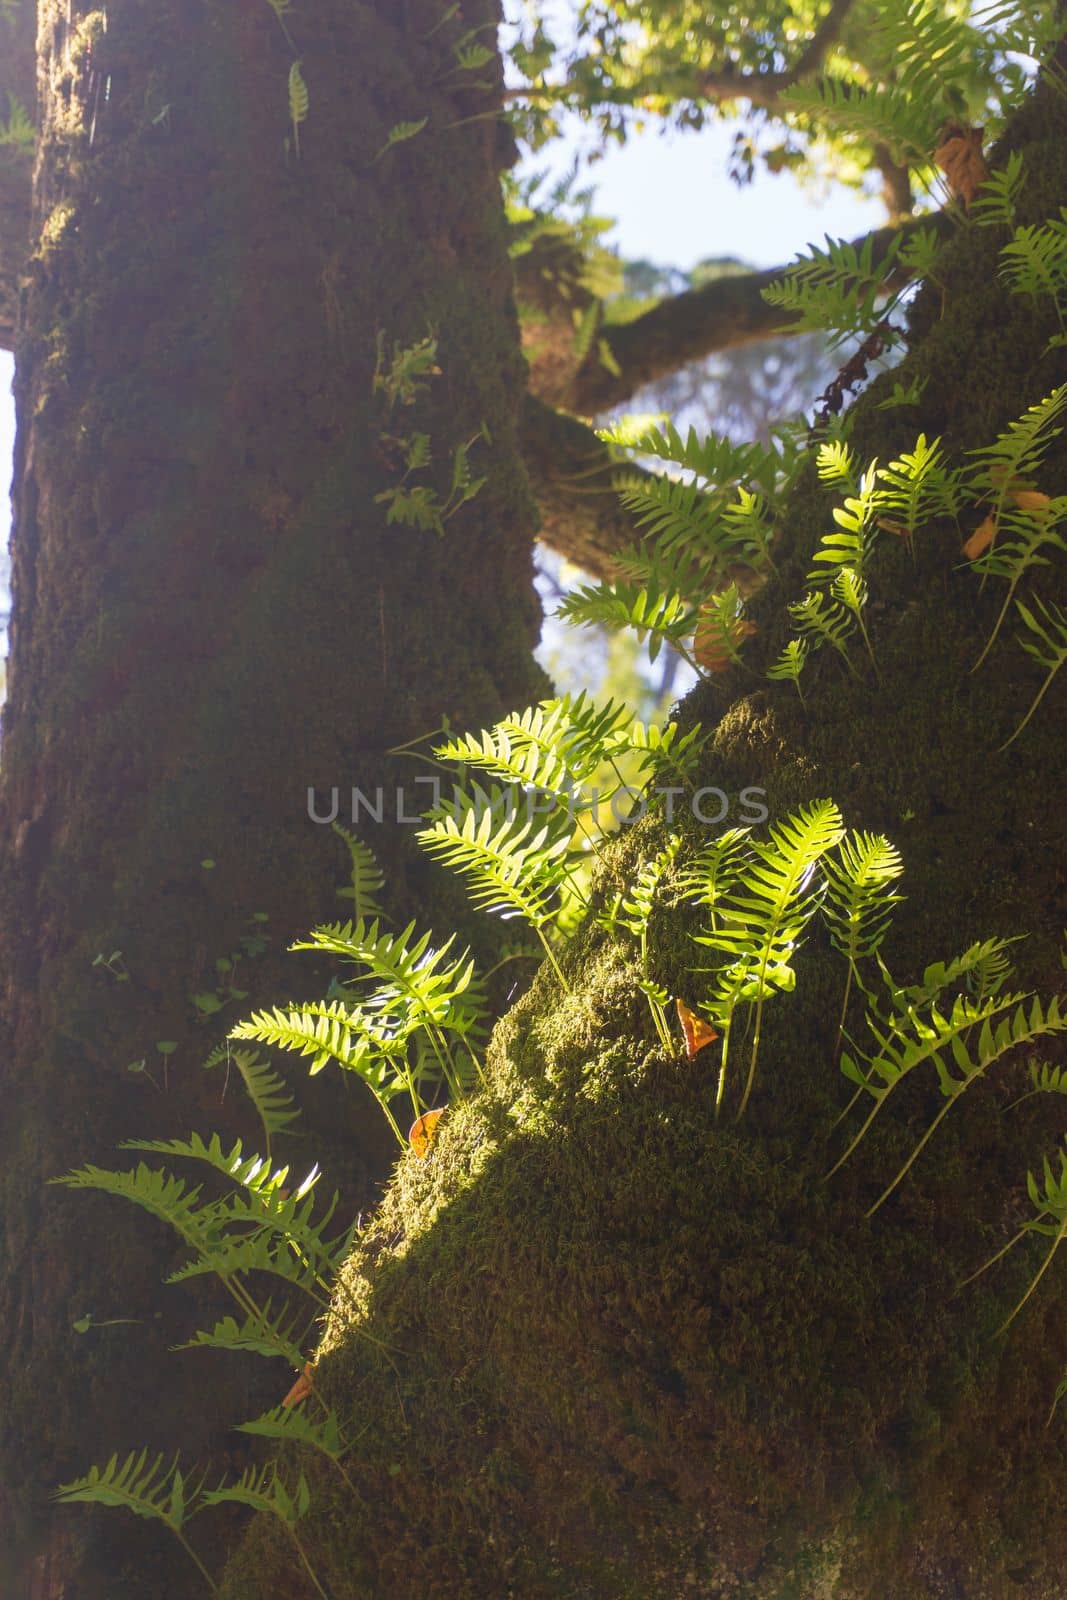 Young fern leaves germinated on a tree trunk in the rays of the sun